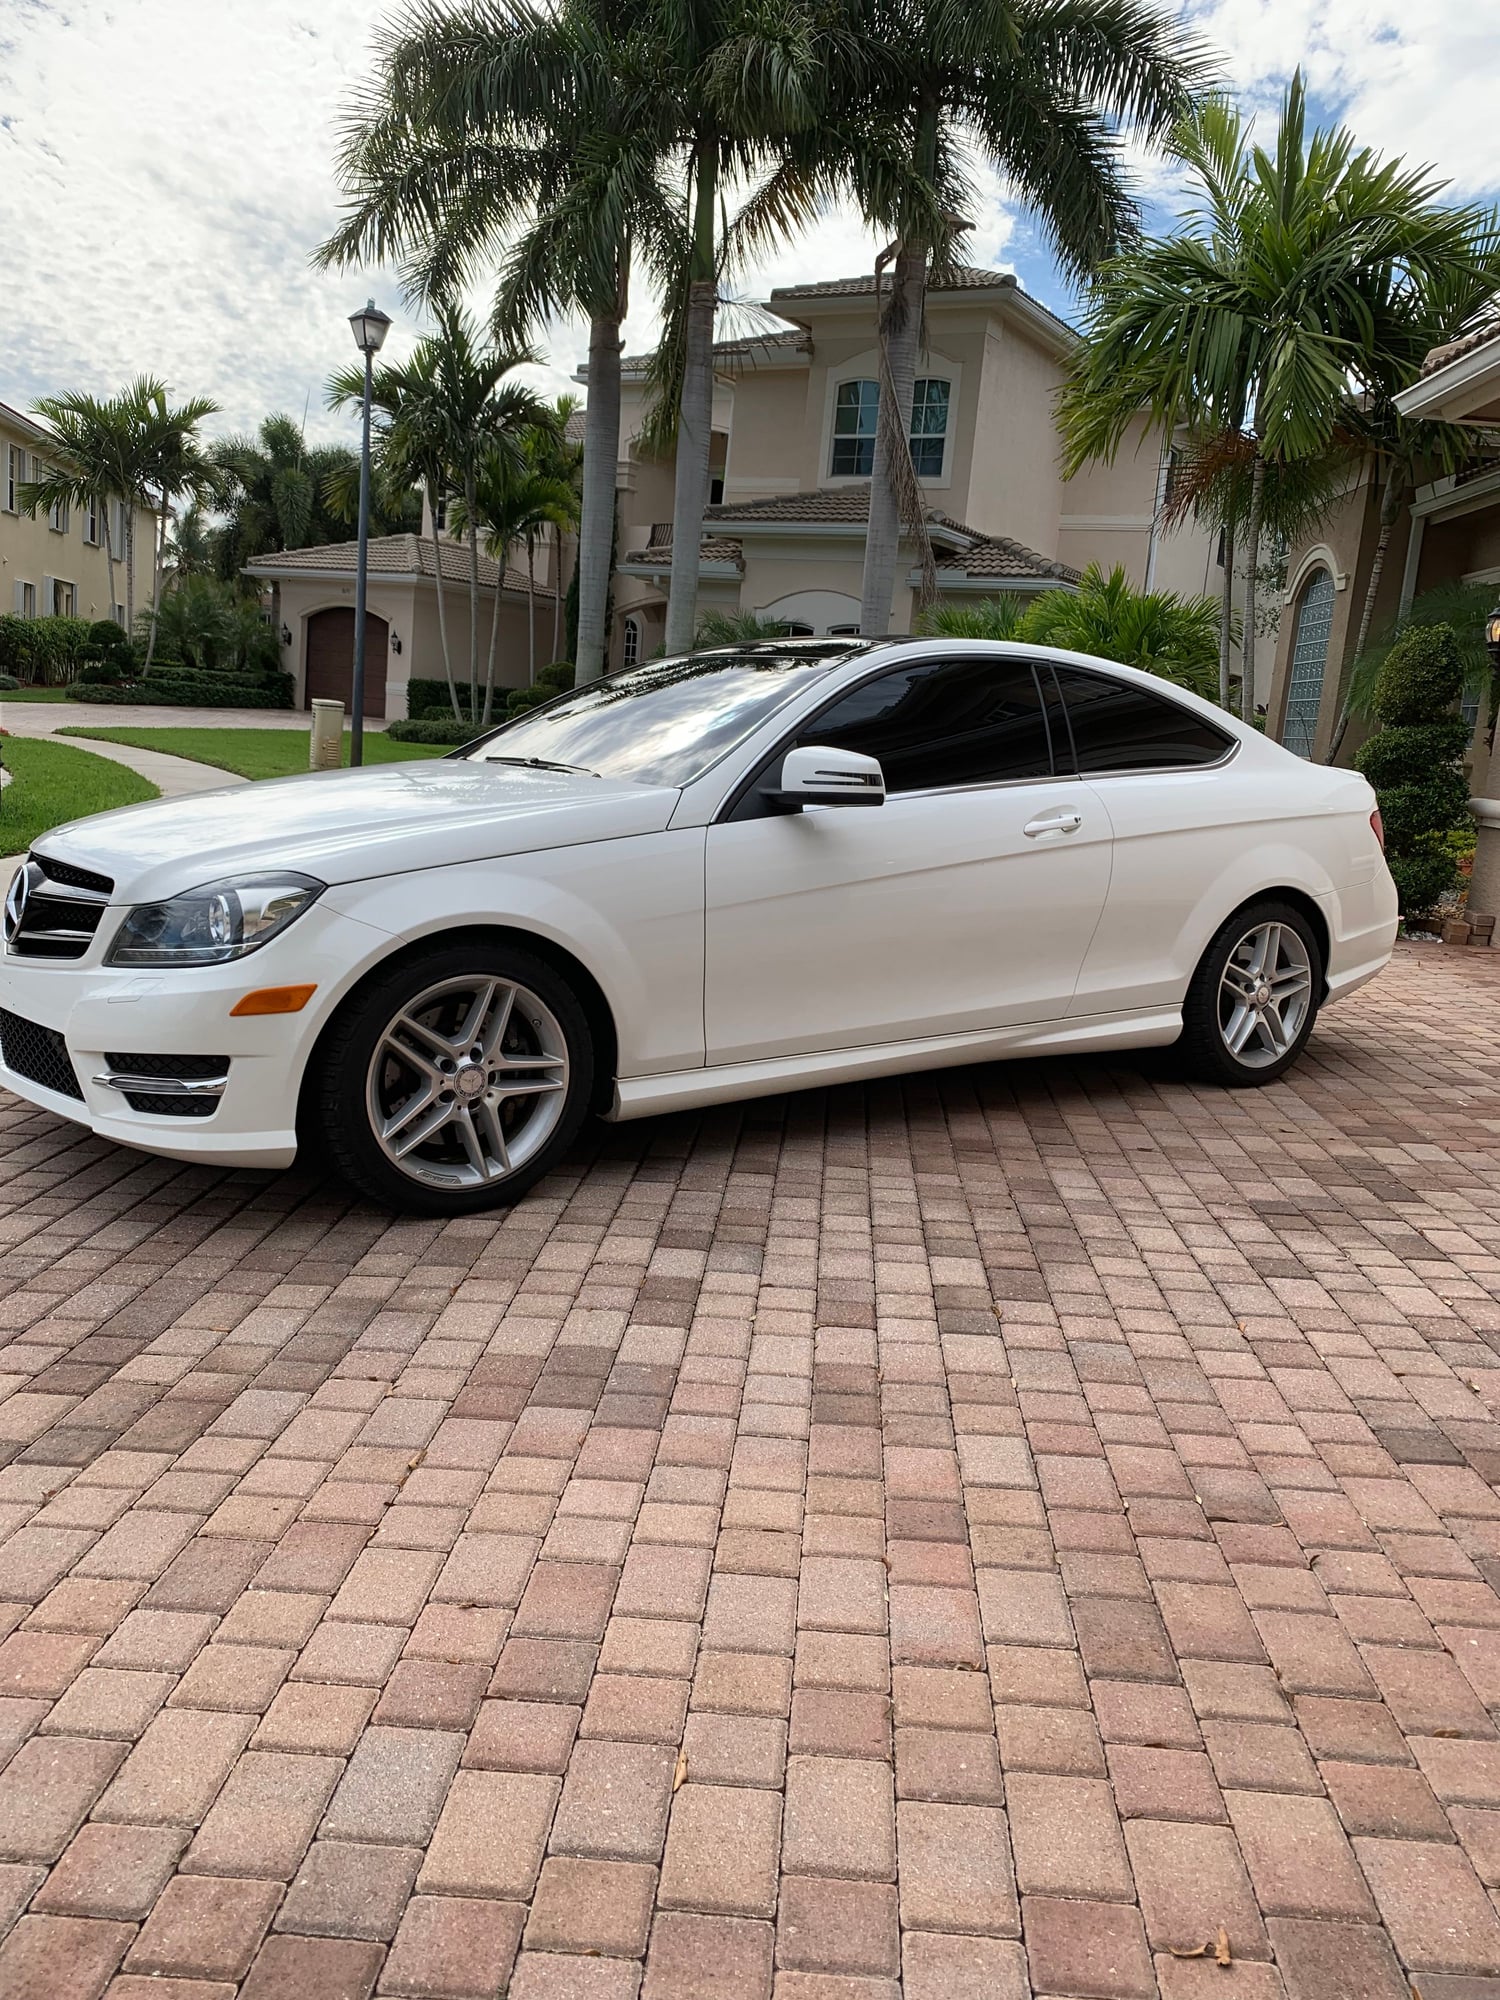 2013 Mercedes-Benz C350 - 2013 C350 Coupe 4Matic - 1 Owner - Showroom condition - Used - VIN WDDGJ8JB3DG063865 - 46,300 Miles - 6 cyl - AWD - Automatic - Coupe - White - St Petersburg, FL 33710, United States